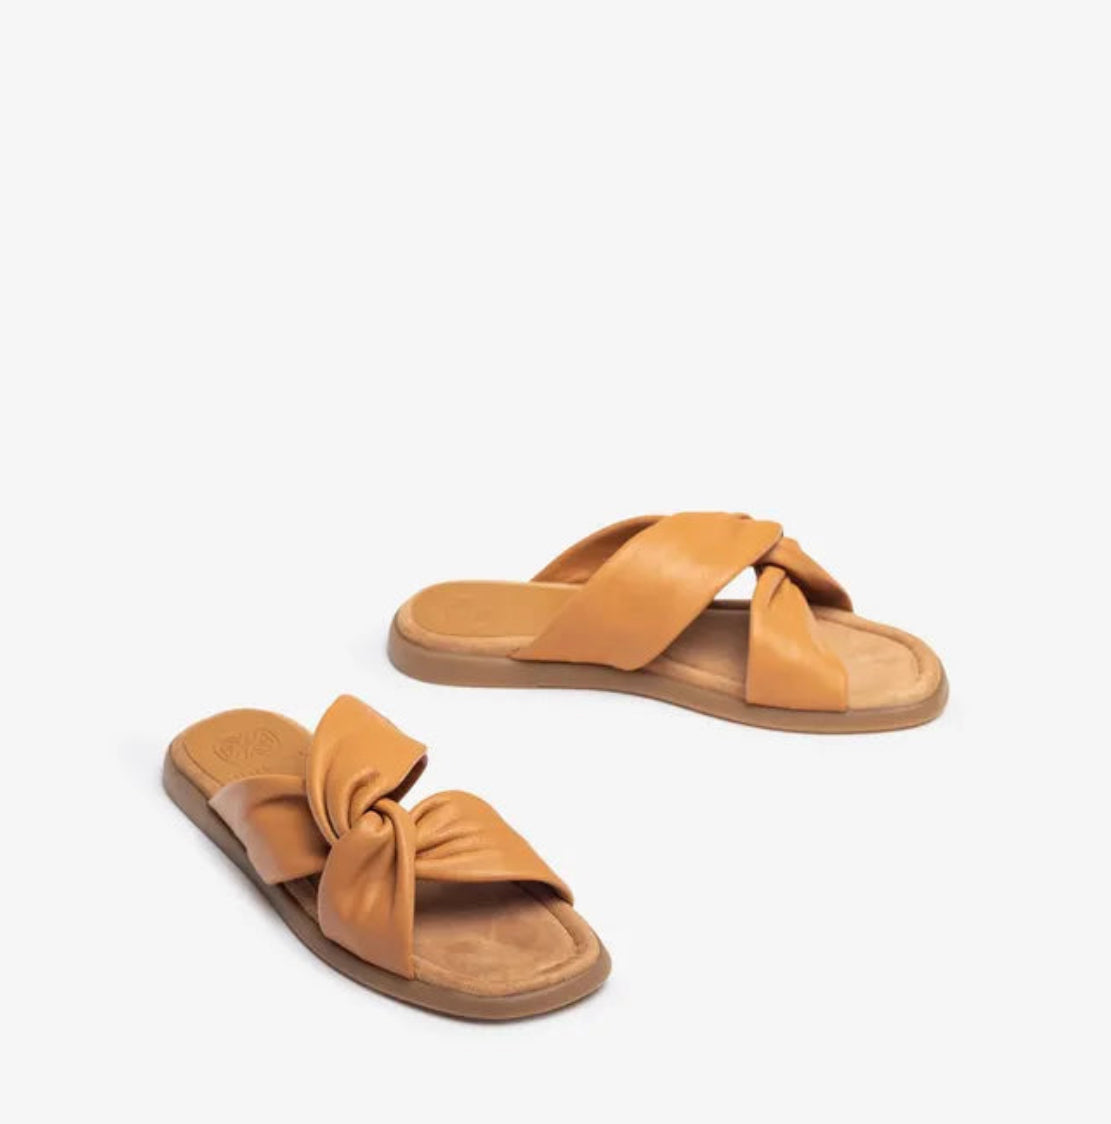 Unisa - Camby Tan Leather Slide